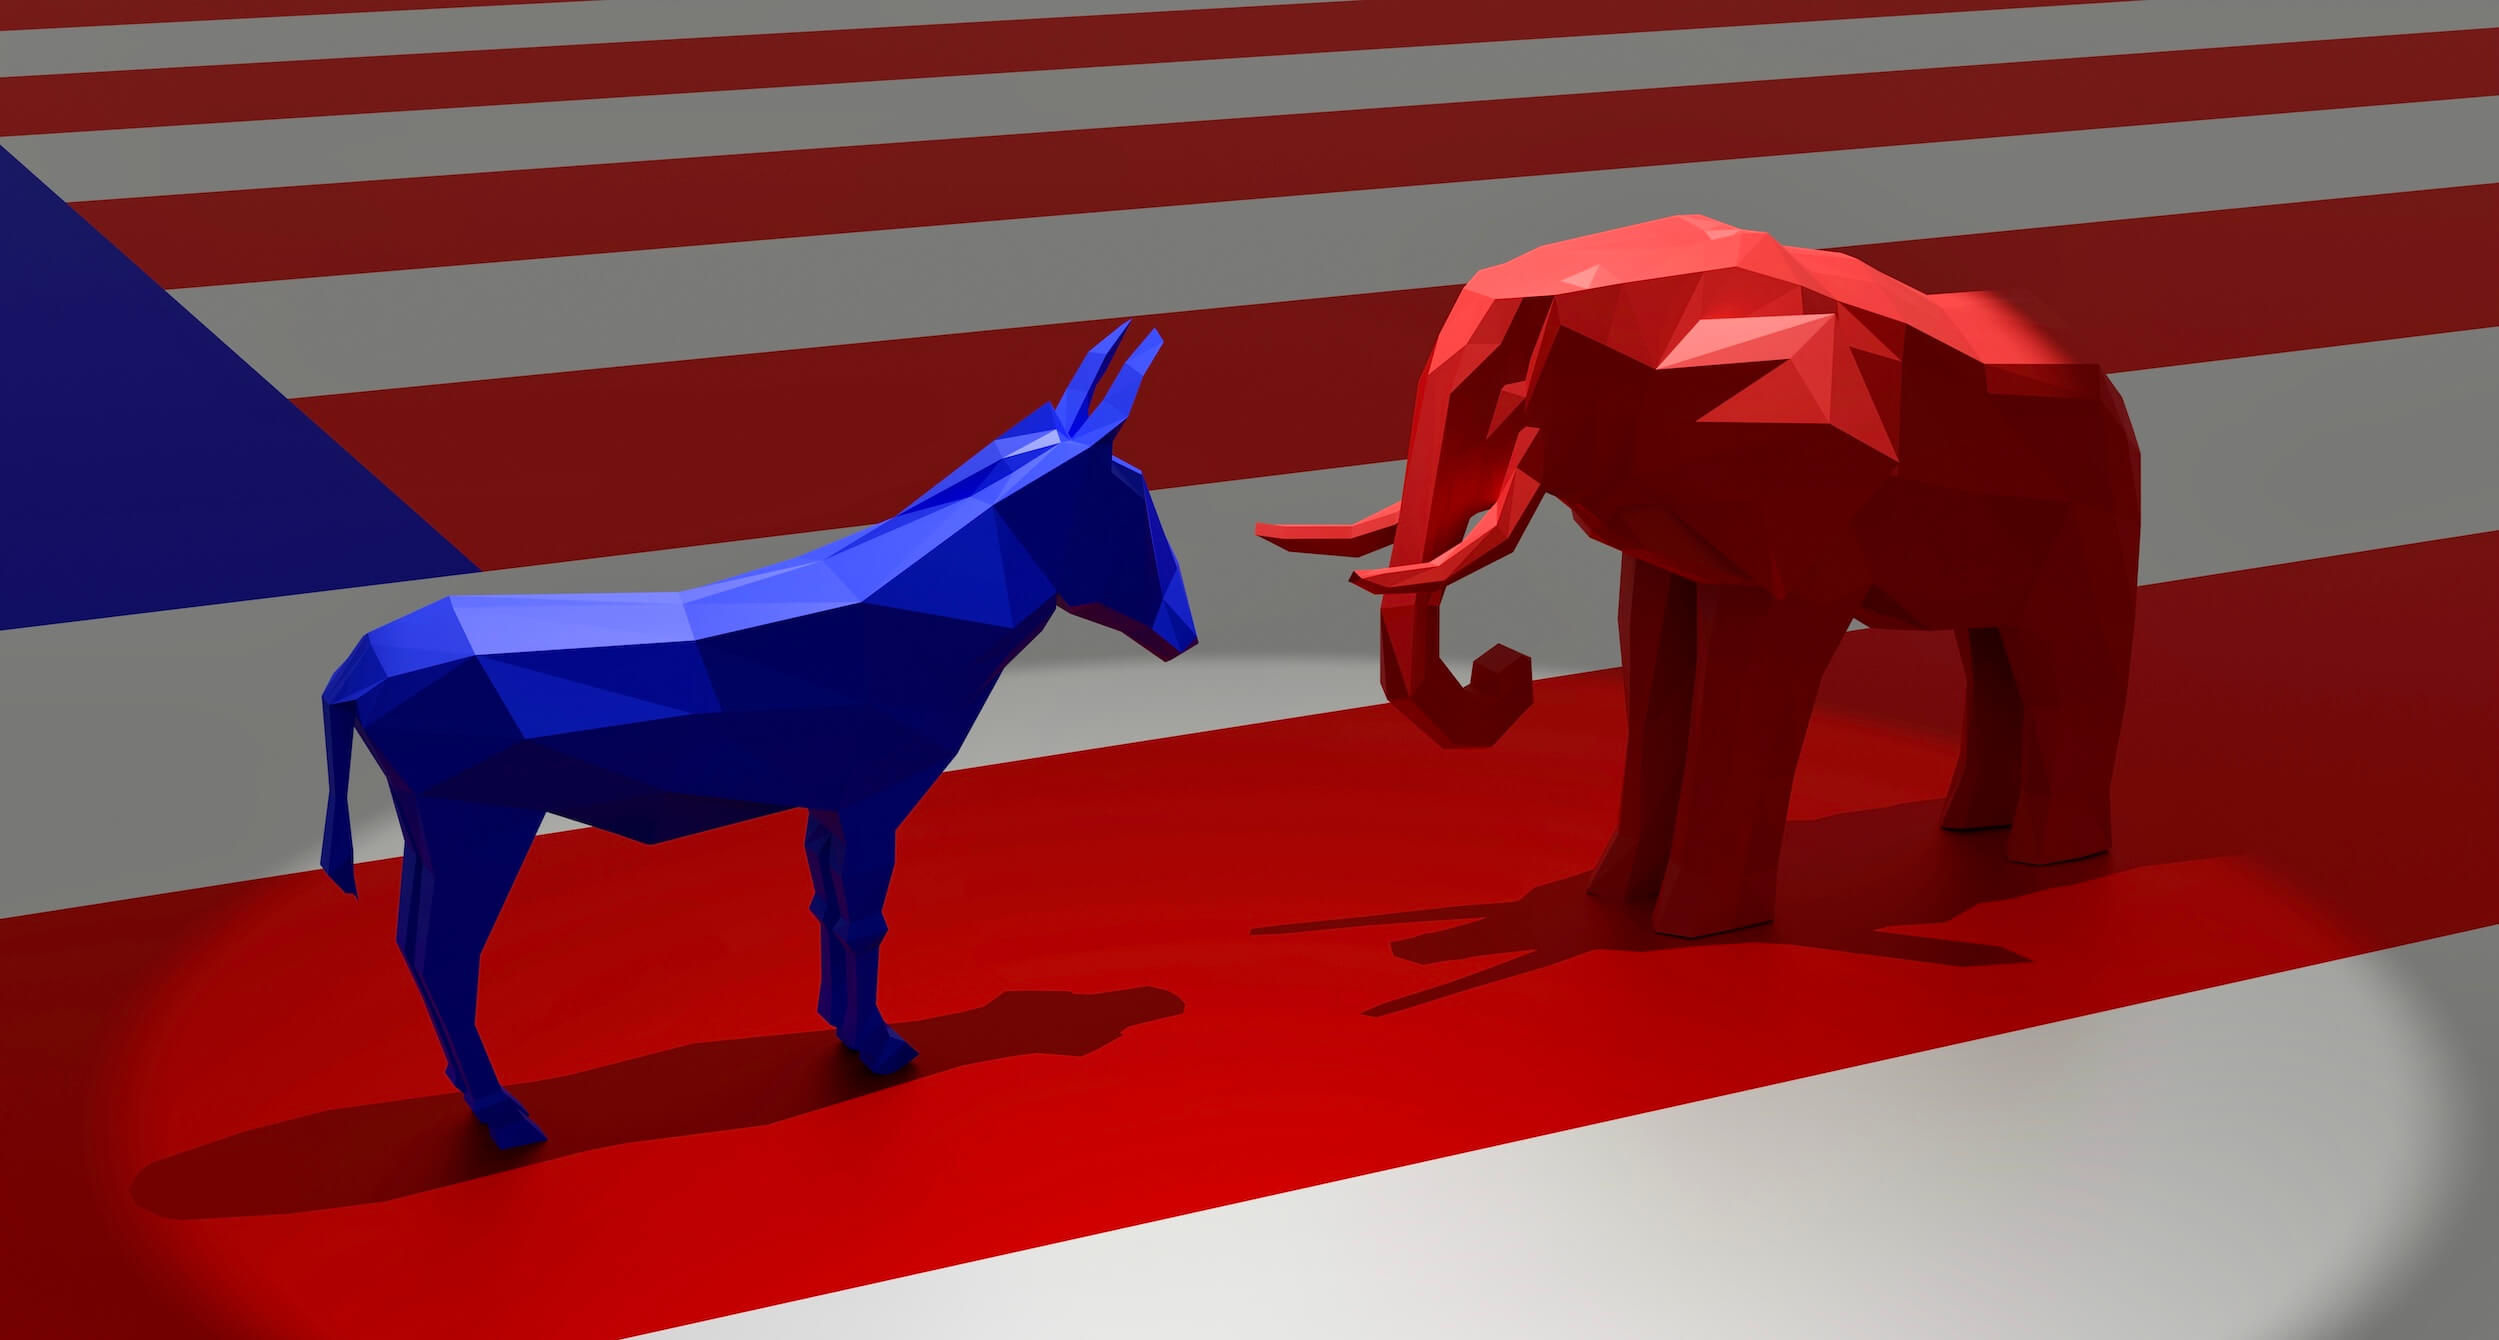 Americans Move to Red and Blue States as Polarization Deepens